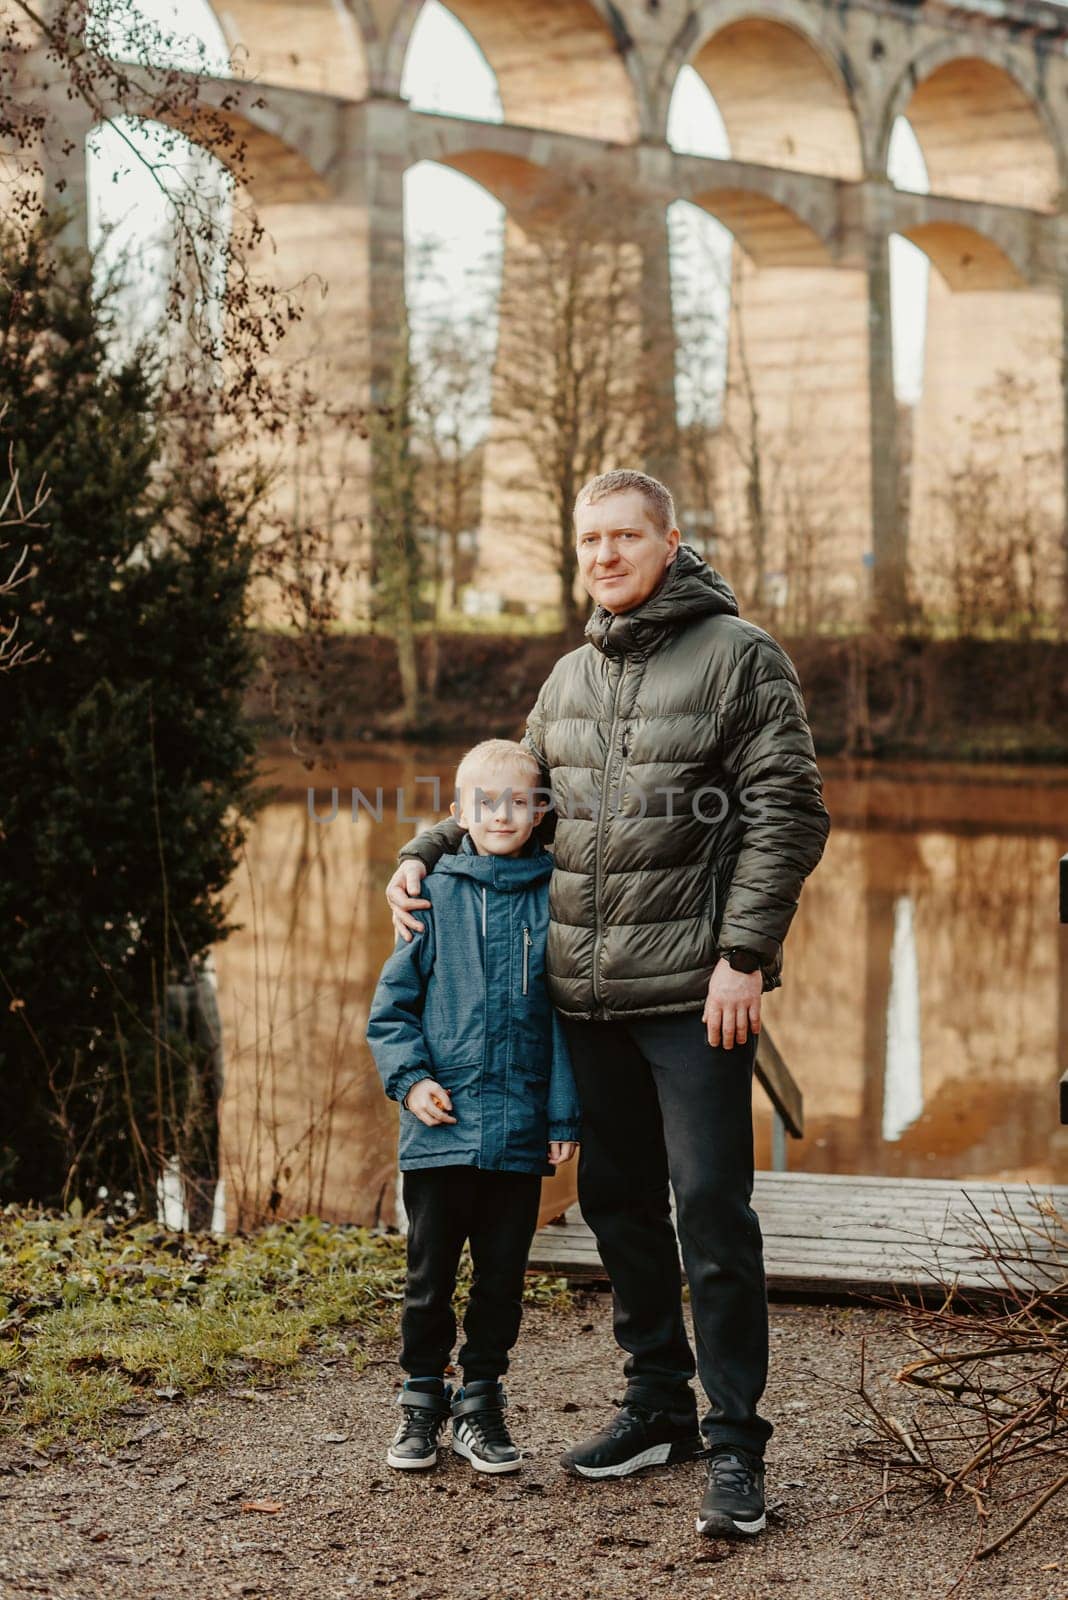 Family Serenity: Handsome 40-Year-Old Man and 8-Year-Old Son Amidst the Beauty of Neckar River and Historic Bridge, Bietigheim-Bissingen, Germany, Winter or Autumn. Embrace the warmth of family bonds against the backdrop of scenic beauty. This image features a handsome 40-year-old man and his 8-year-old son standing in the serene park by Neckar River and Historic Bridge in Bietigheim-Bissingen, Germany. Whether touched by winter's chill or the colors of autumn, it's a timeless moment of familial connection amidst captivating surroundings.